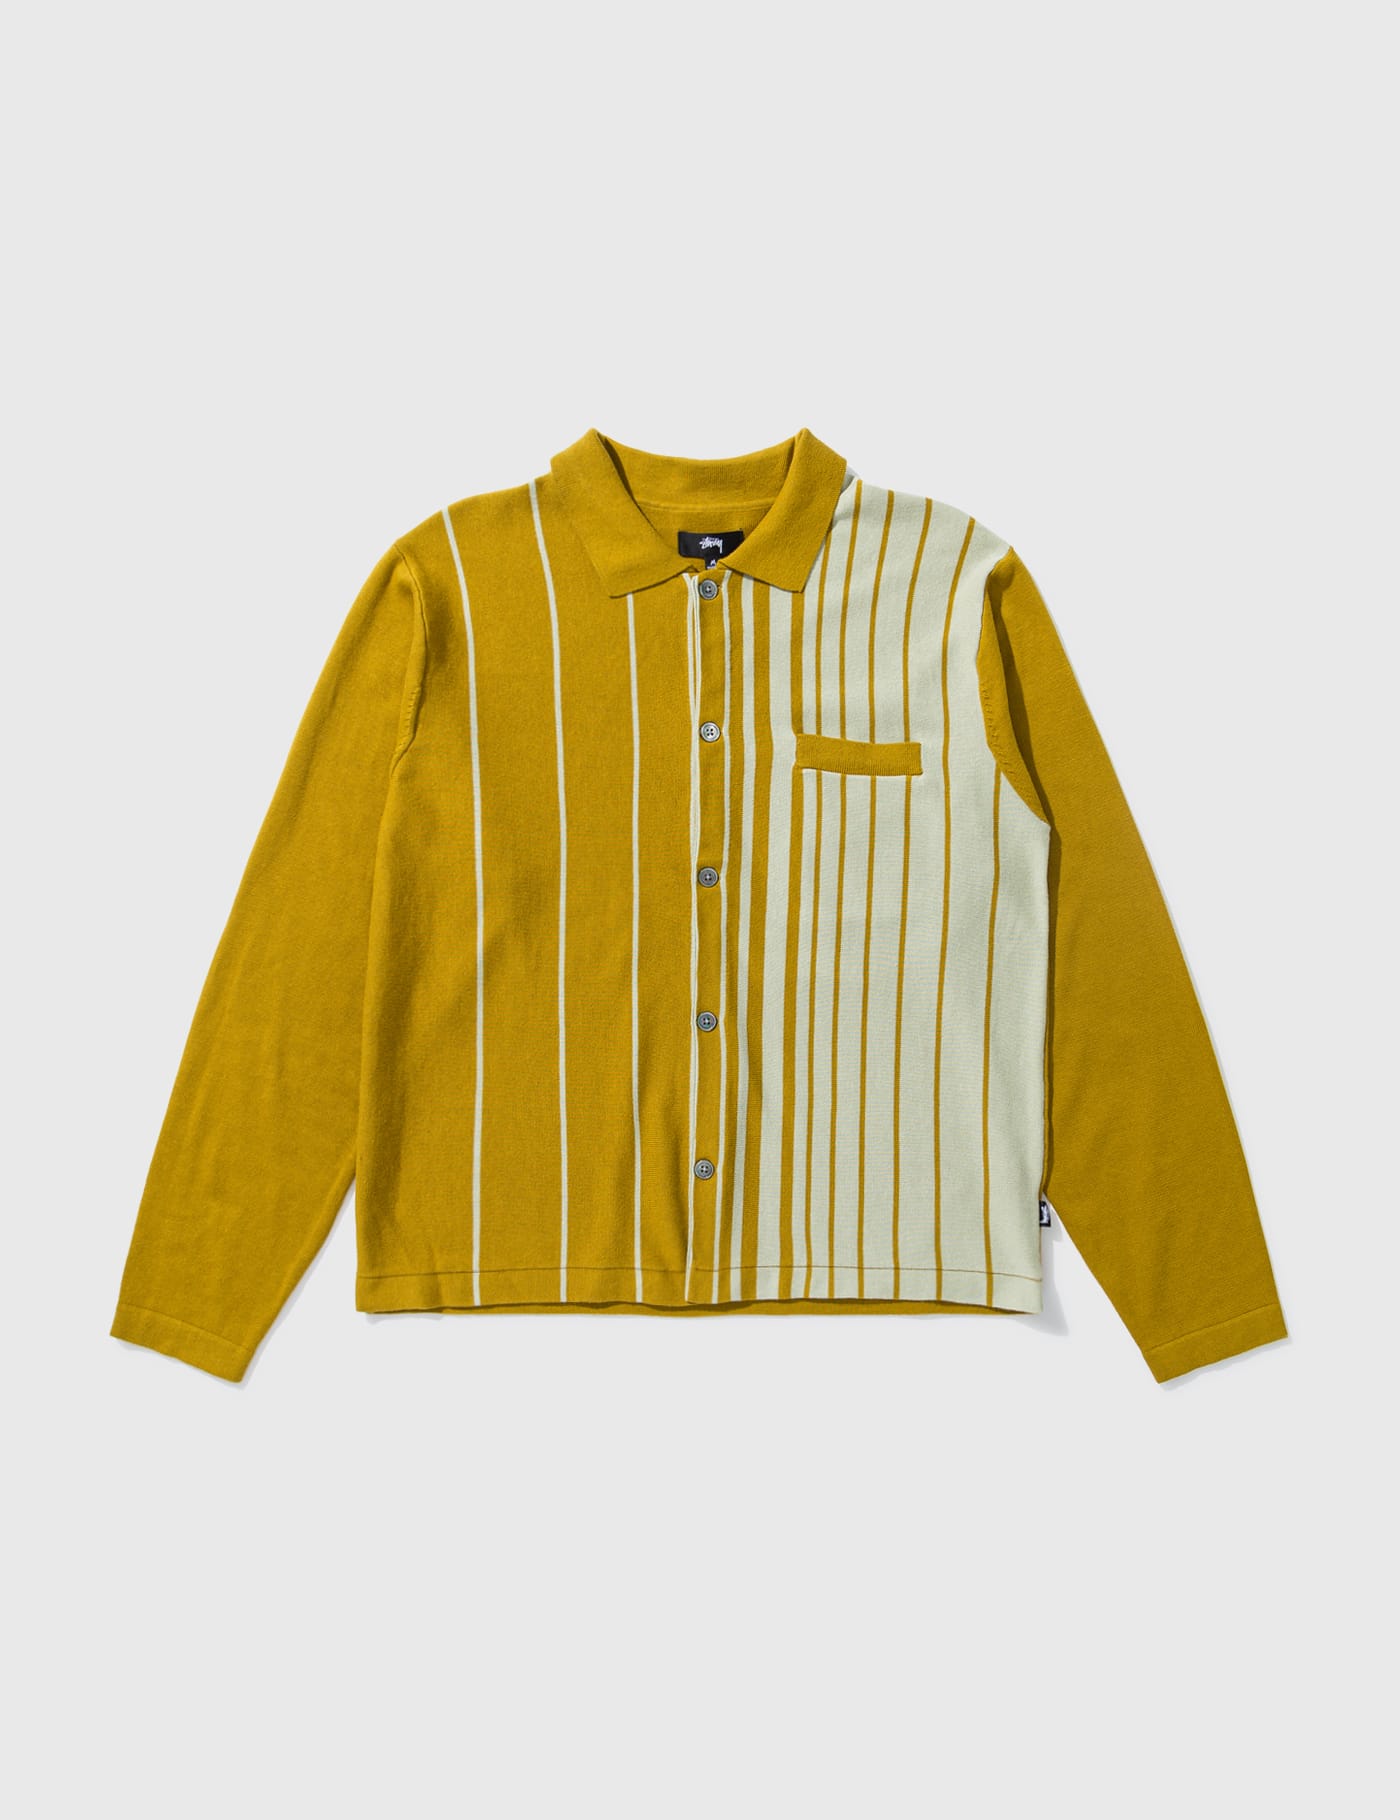 Stüssy - Striped Knit Shirt | HBX - Globally Curated Fashion and